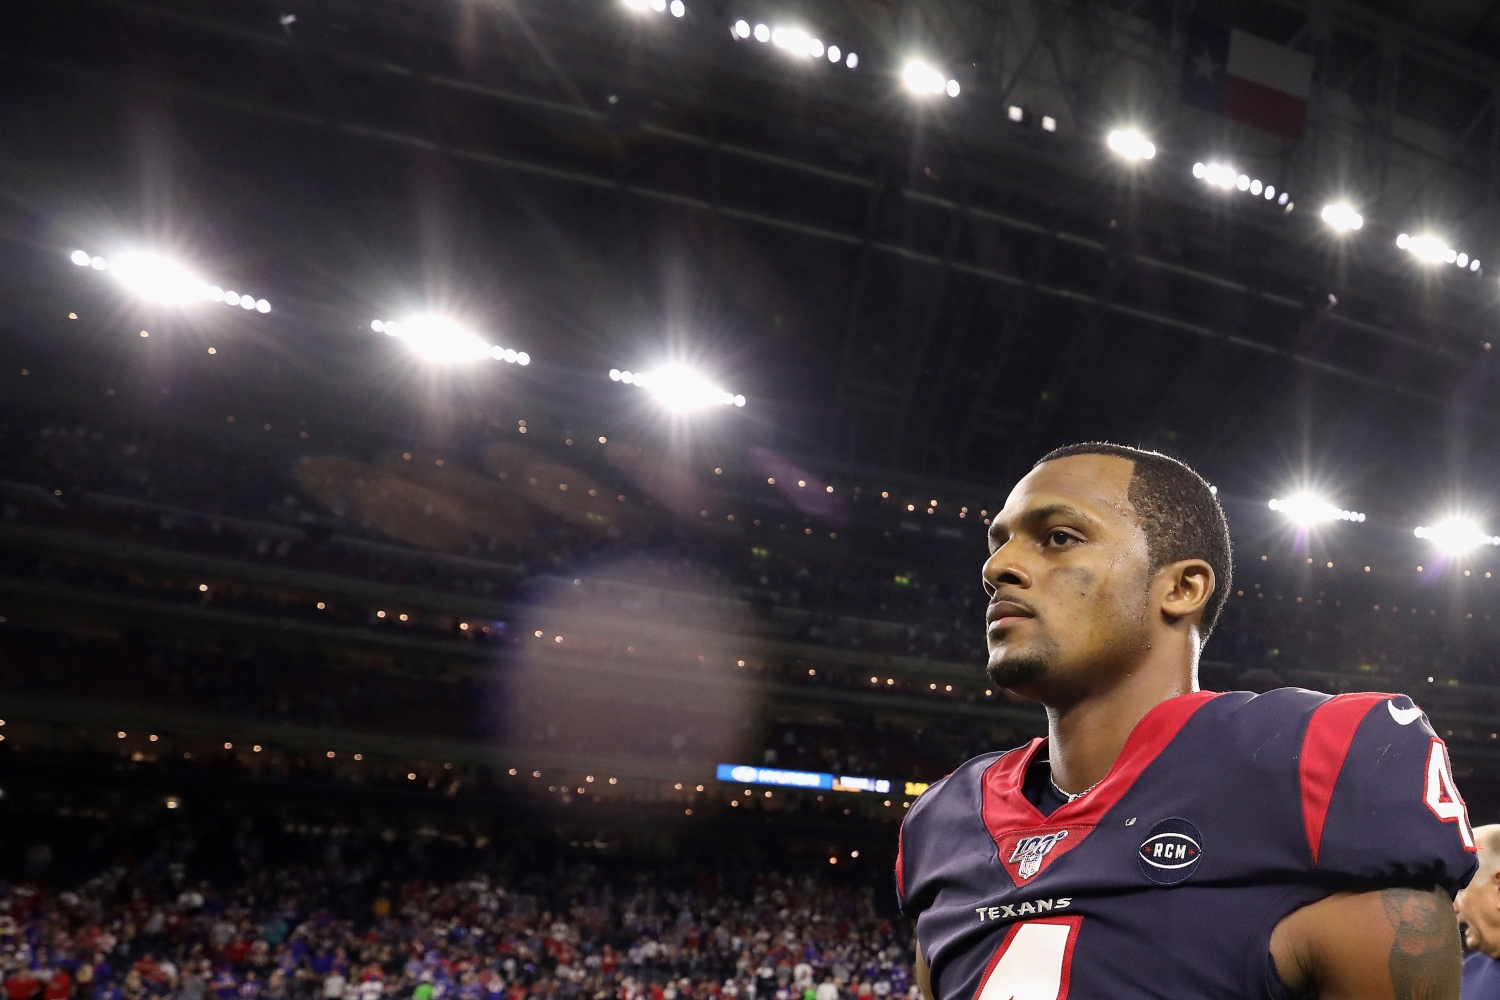 Deshaun Watson walks off the field after the Houston Texans lost to the Buffalo Bills in the playoffs on Jan. 4, 2020.